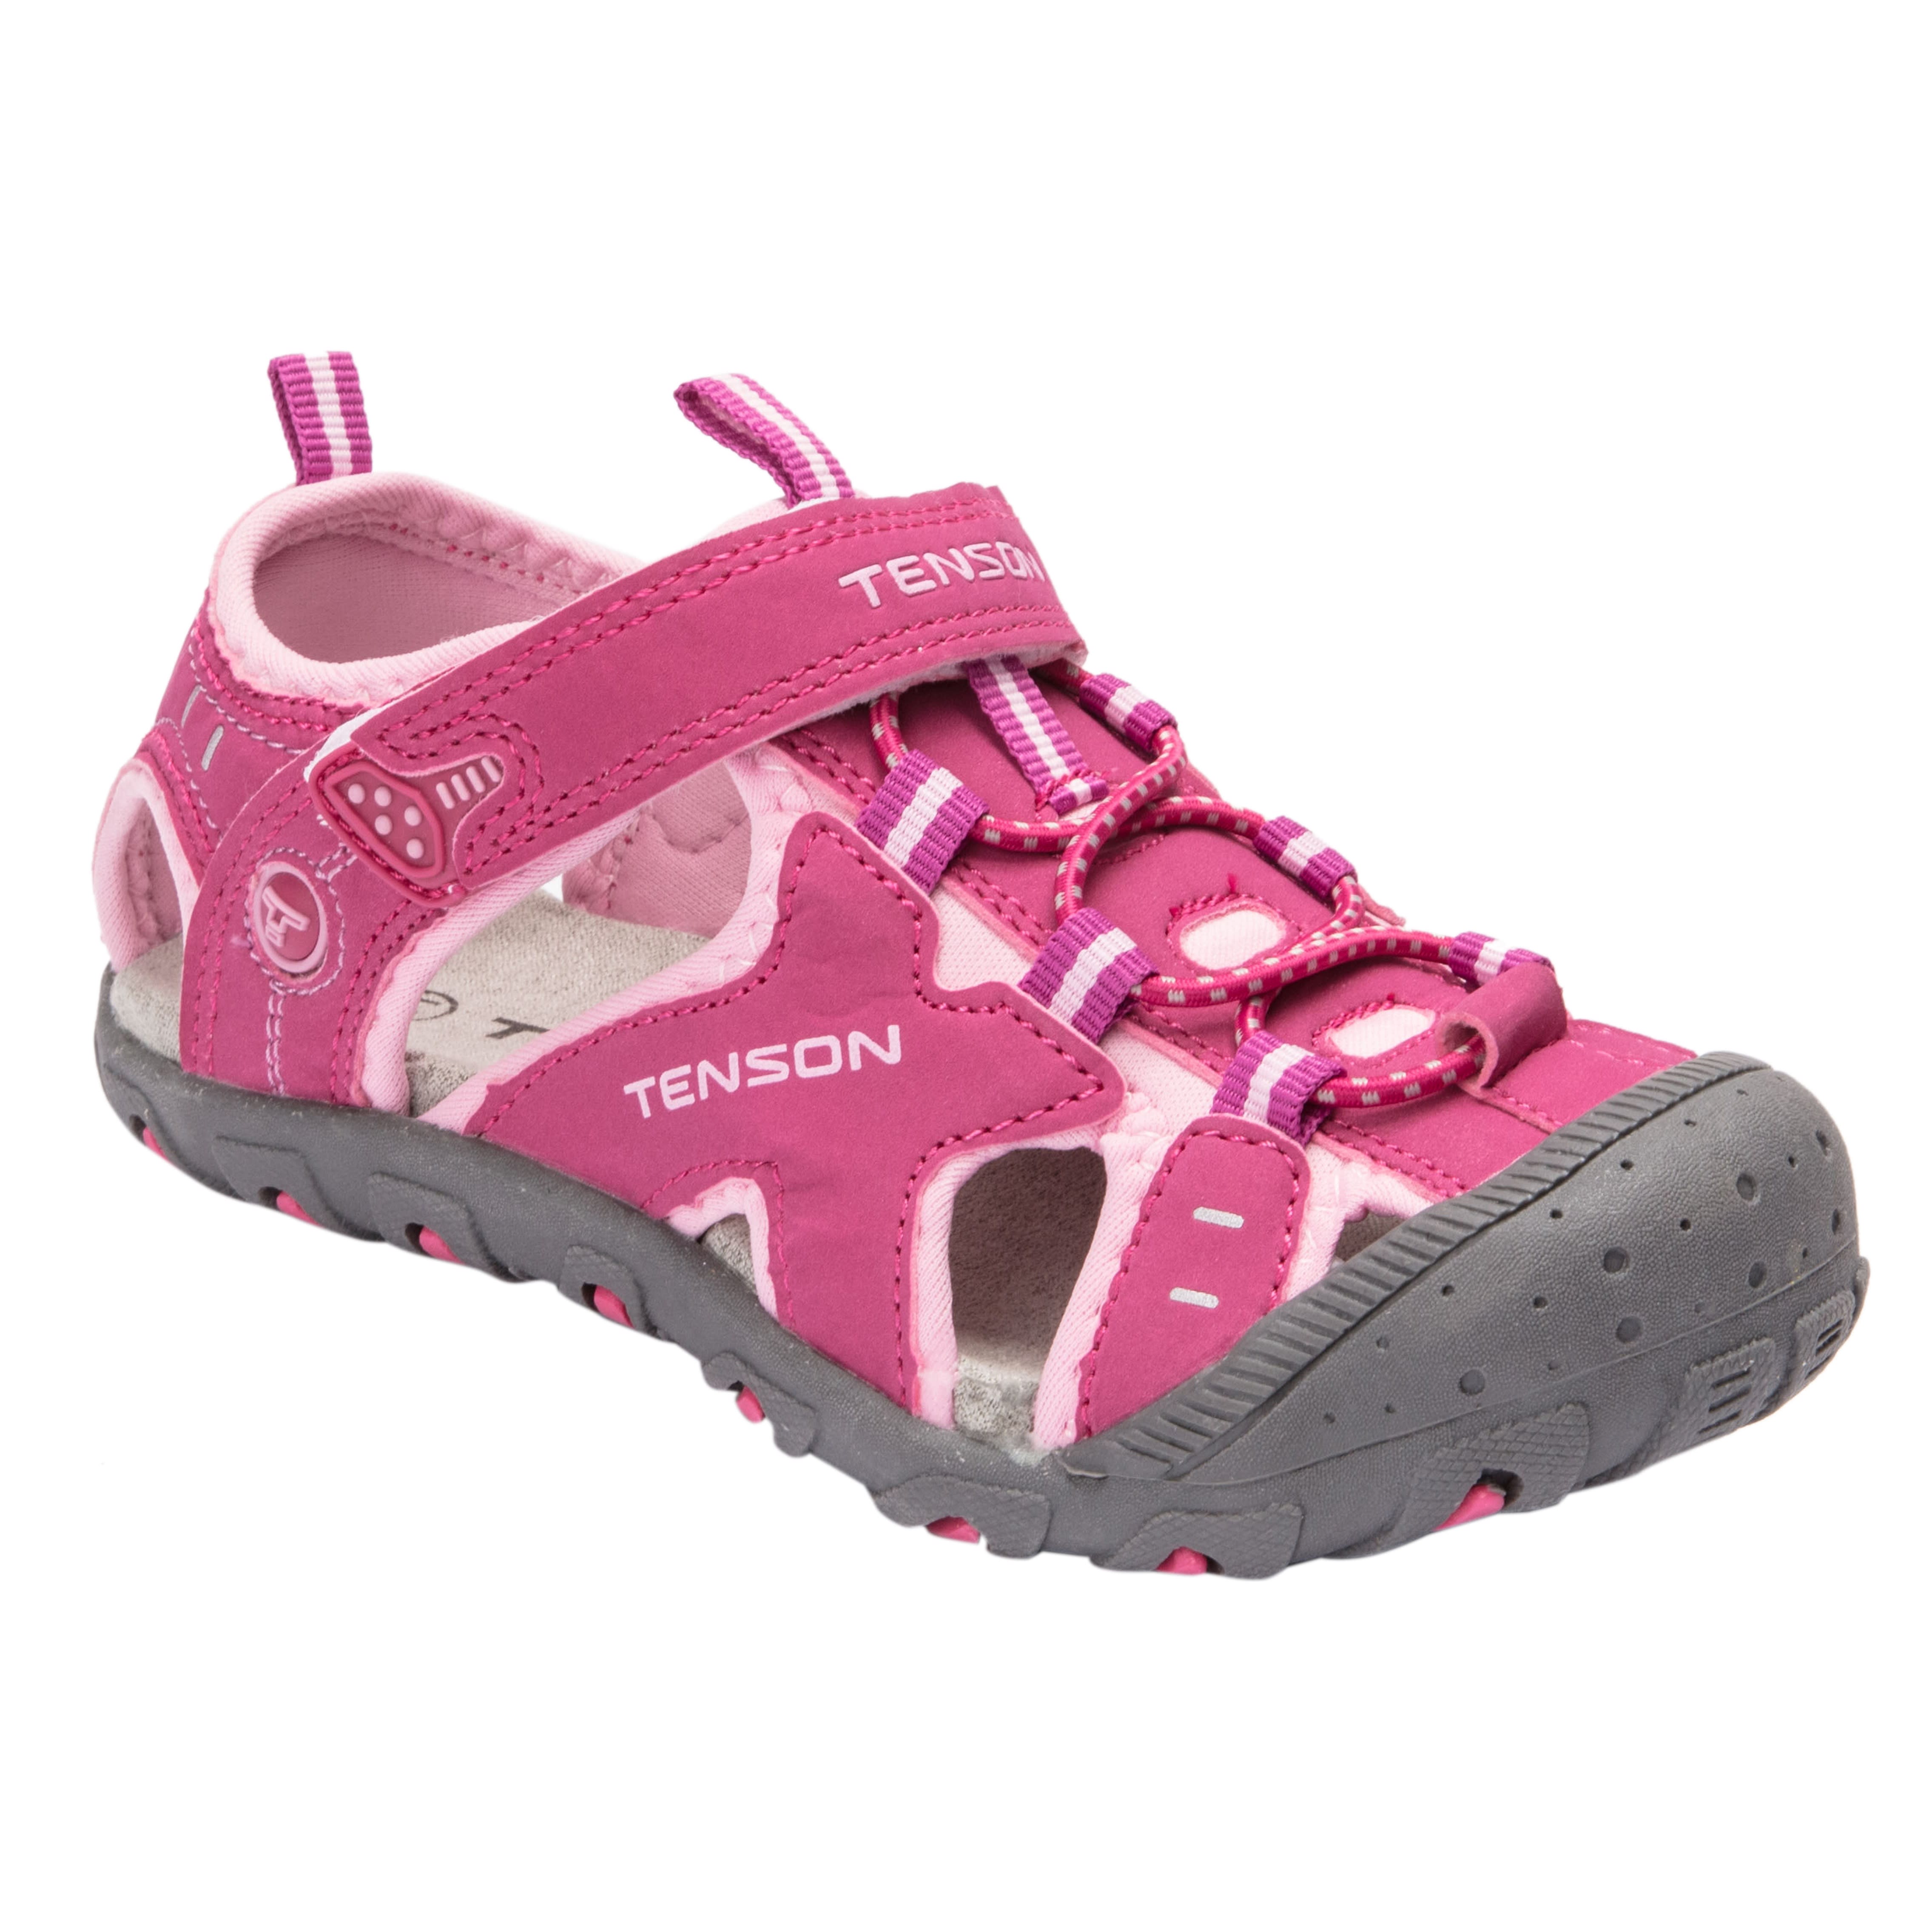 Buy Teyah Kids Sandals from Outnorth